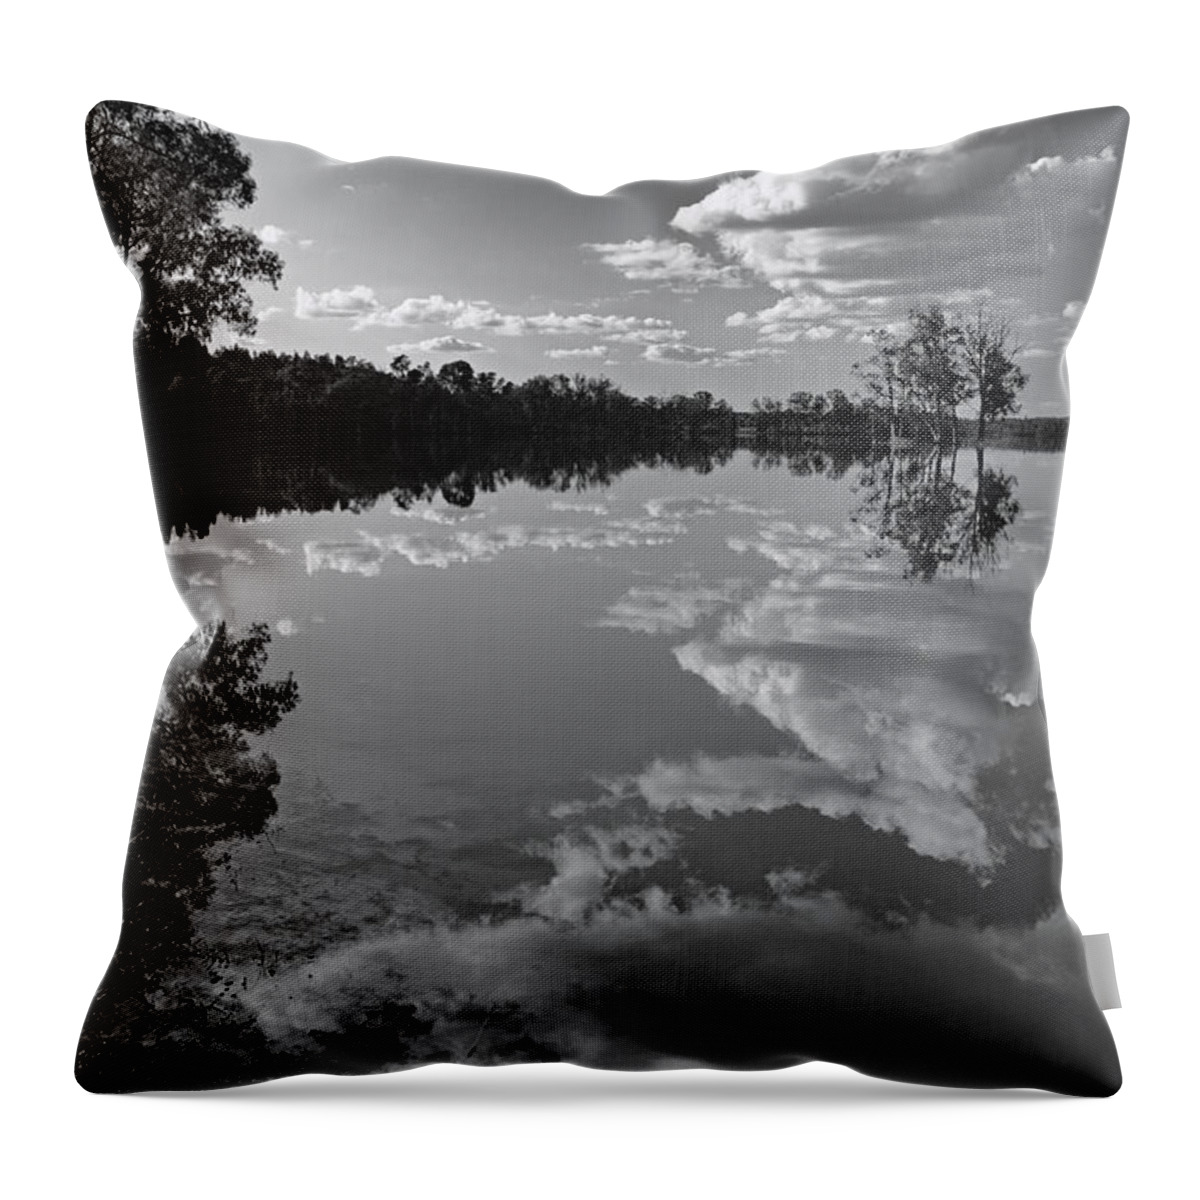 Mertola Throw Pillow featuring the photograph Reflections by the Lake #2 by Angelo DeVal